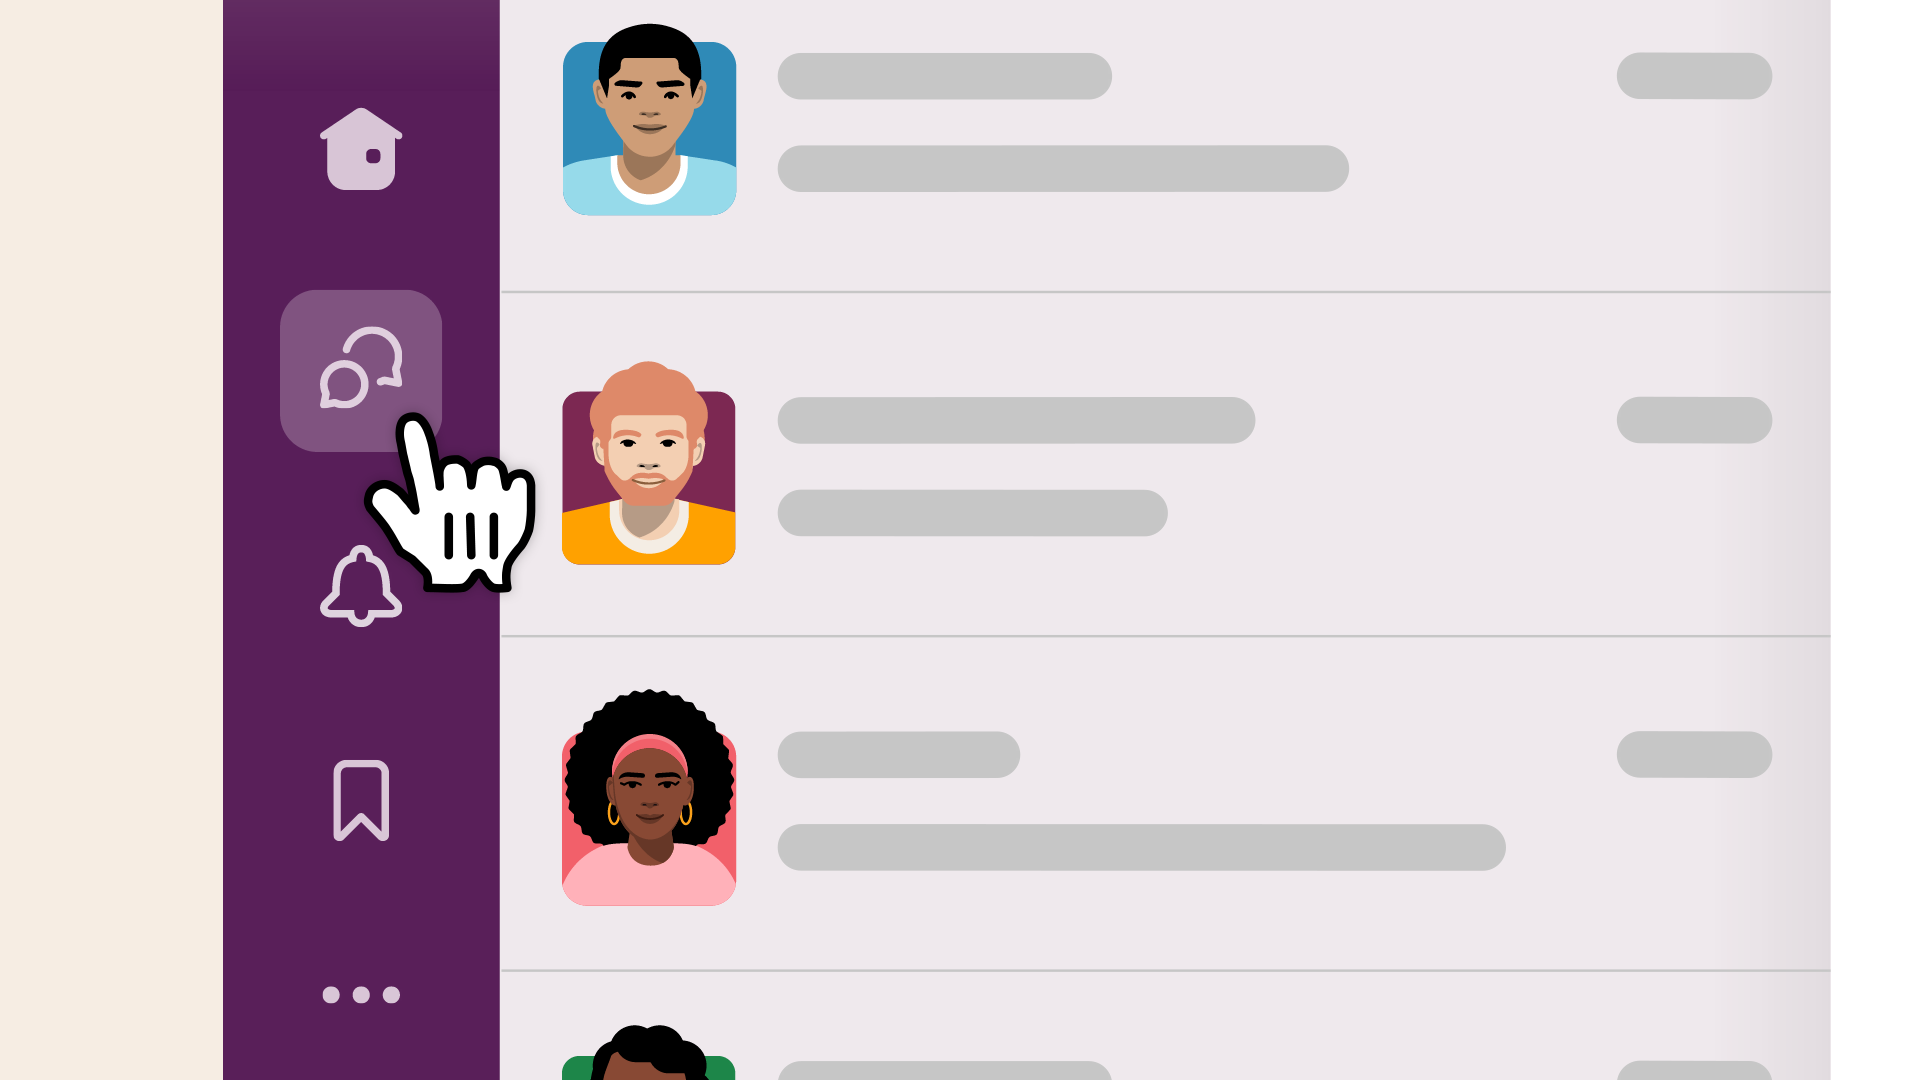 image of a cursor pointing to the DMs icon on the sidebar in the Slack desktop app